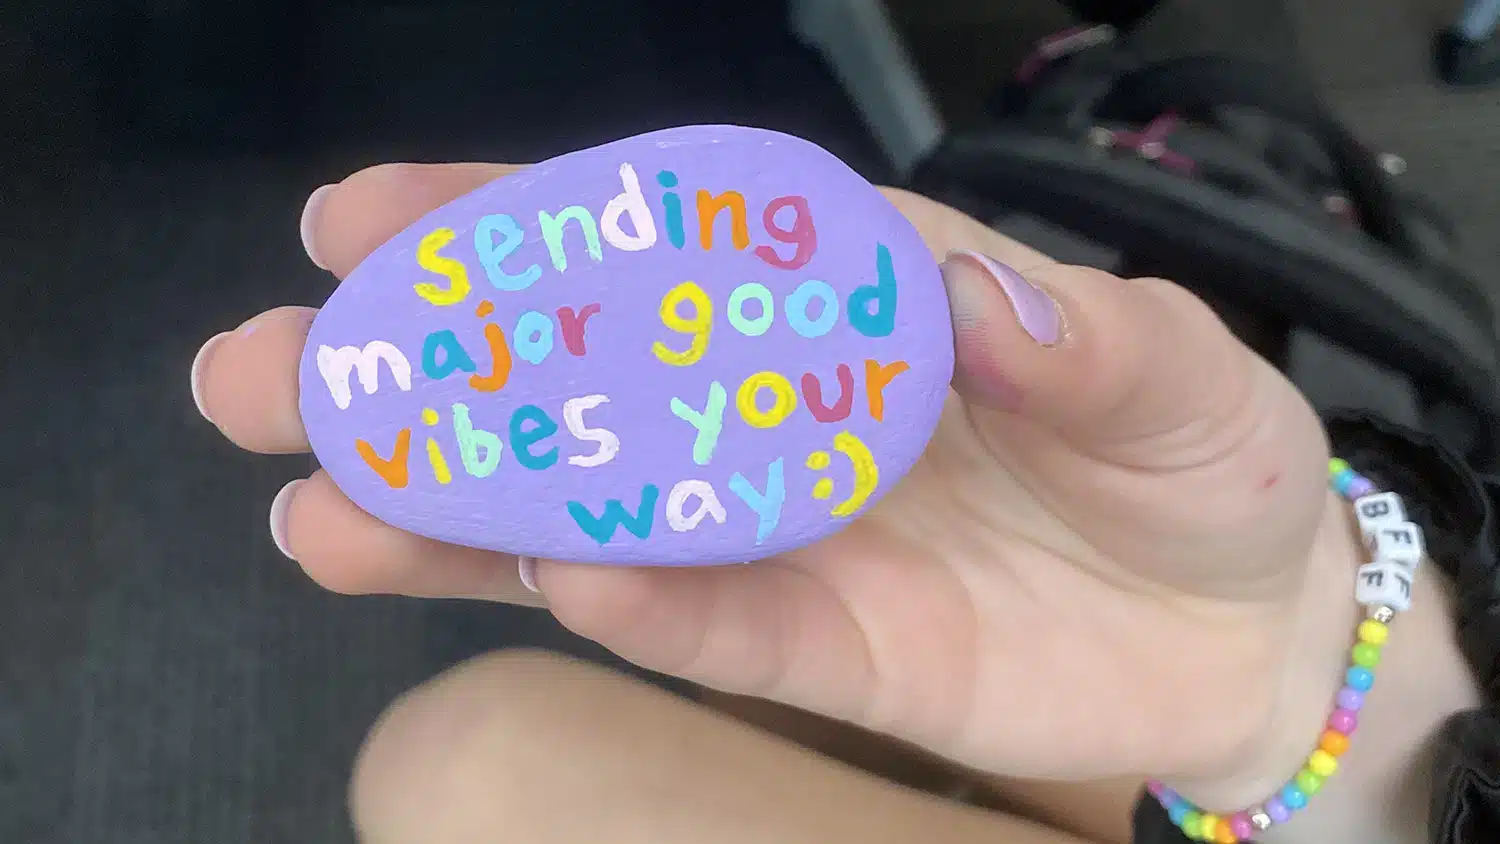 Student holding rock painted purple that reads, "sending major good vibes your way".